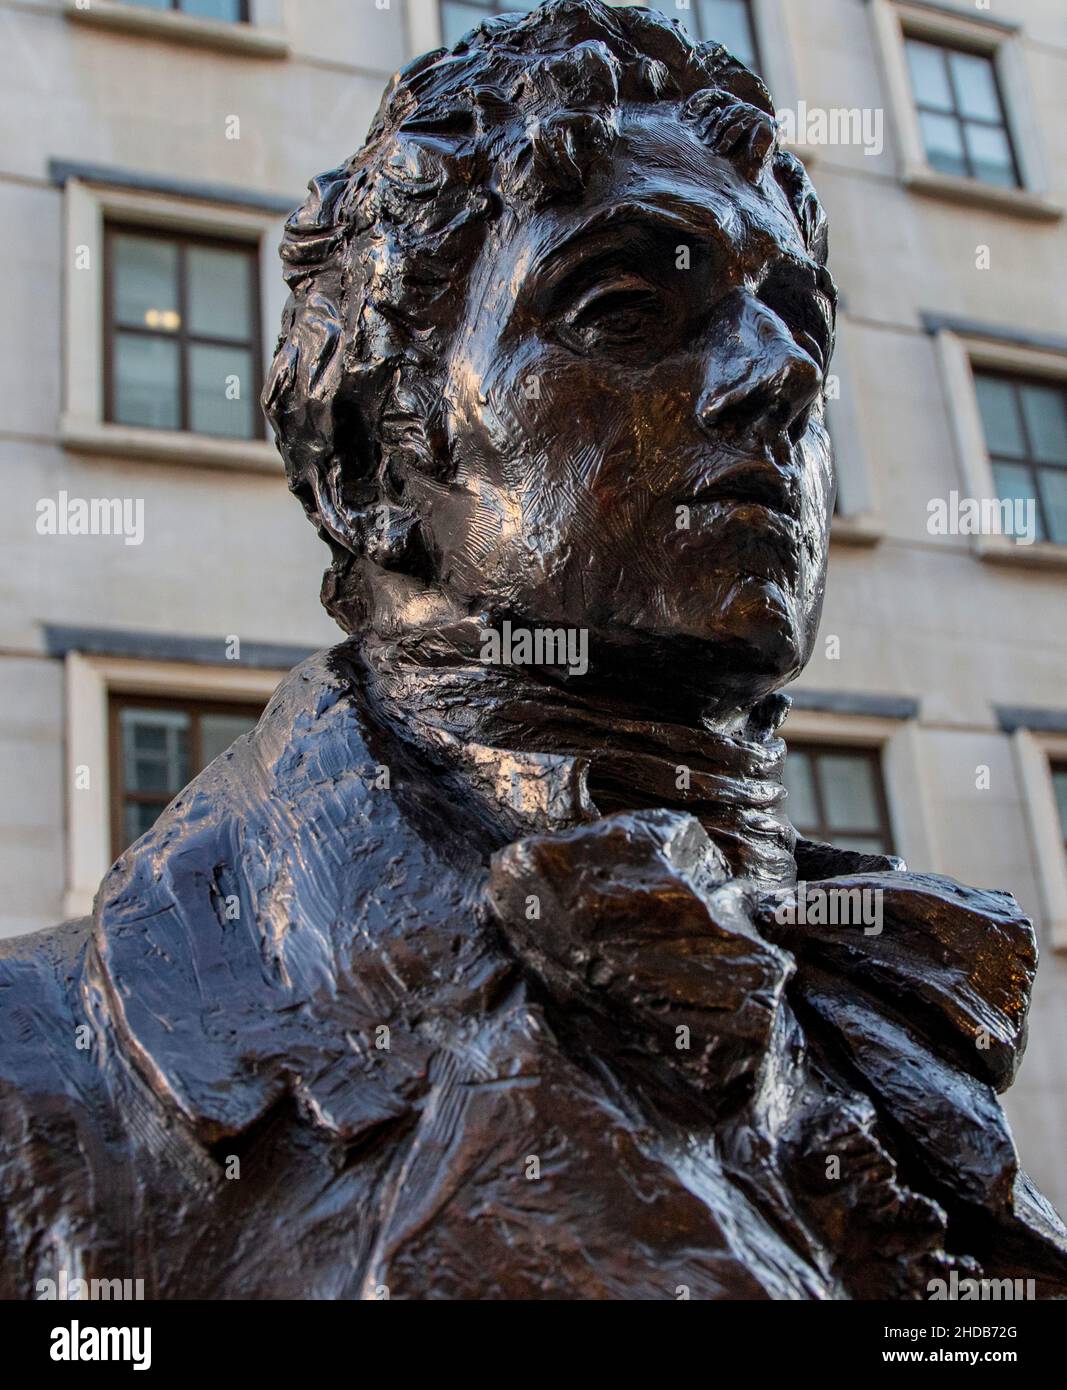 Statue by Irena Sedlecka of George Bryan 'Beau' Brummell (1778-1840), dandy and wit, in Jermyn St, Piccadilly, London Stock Photo